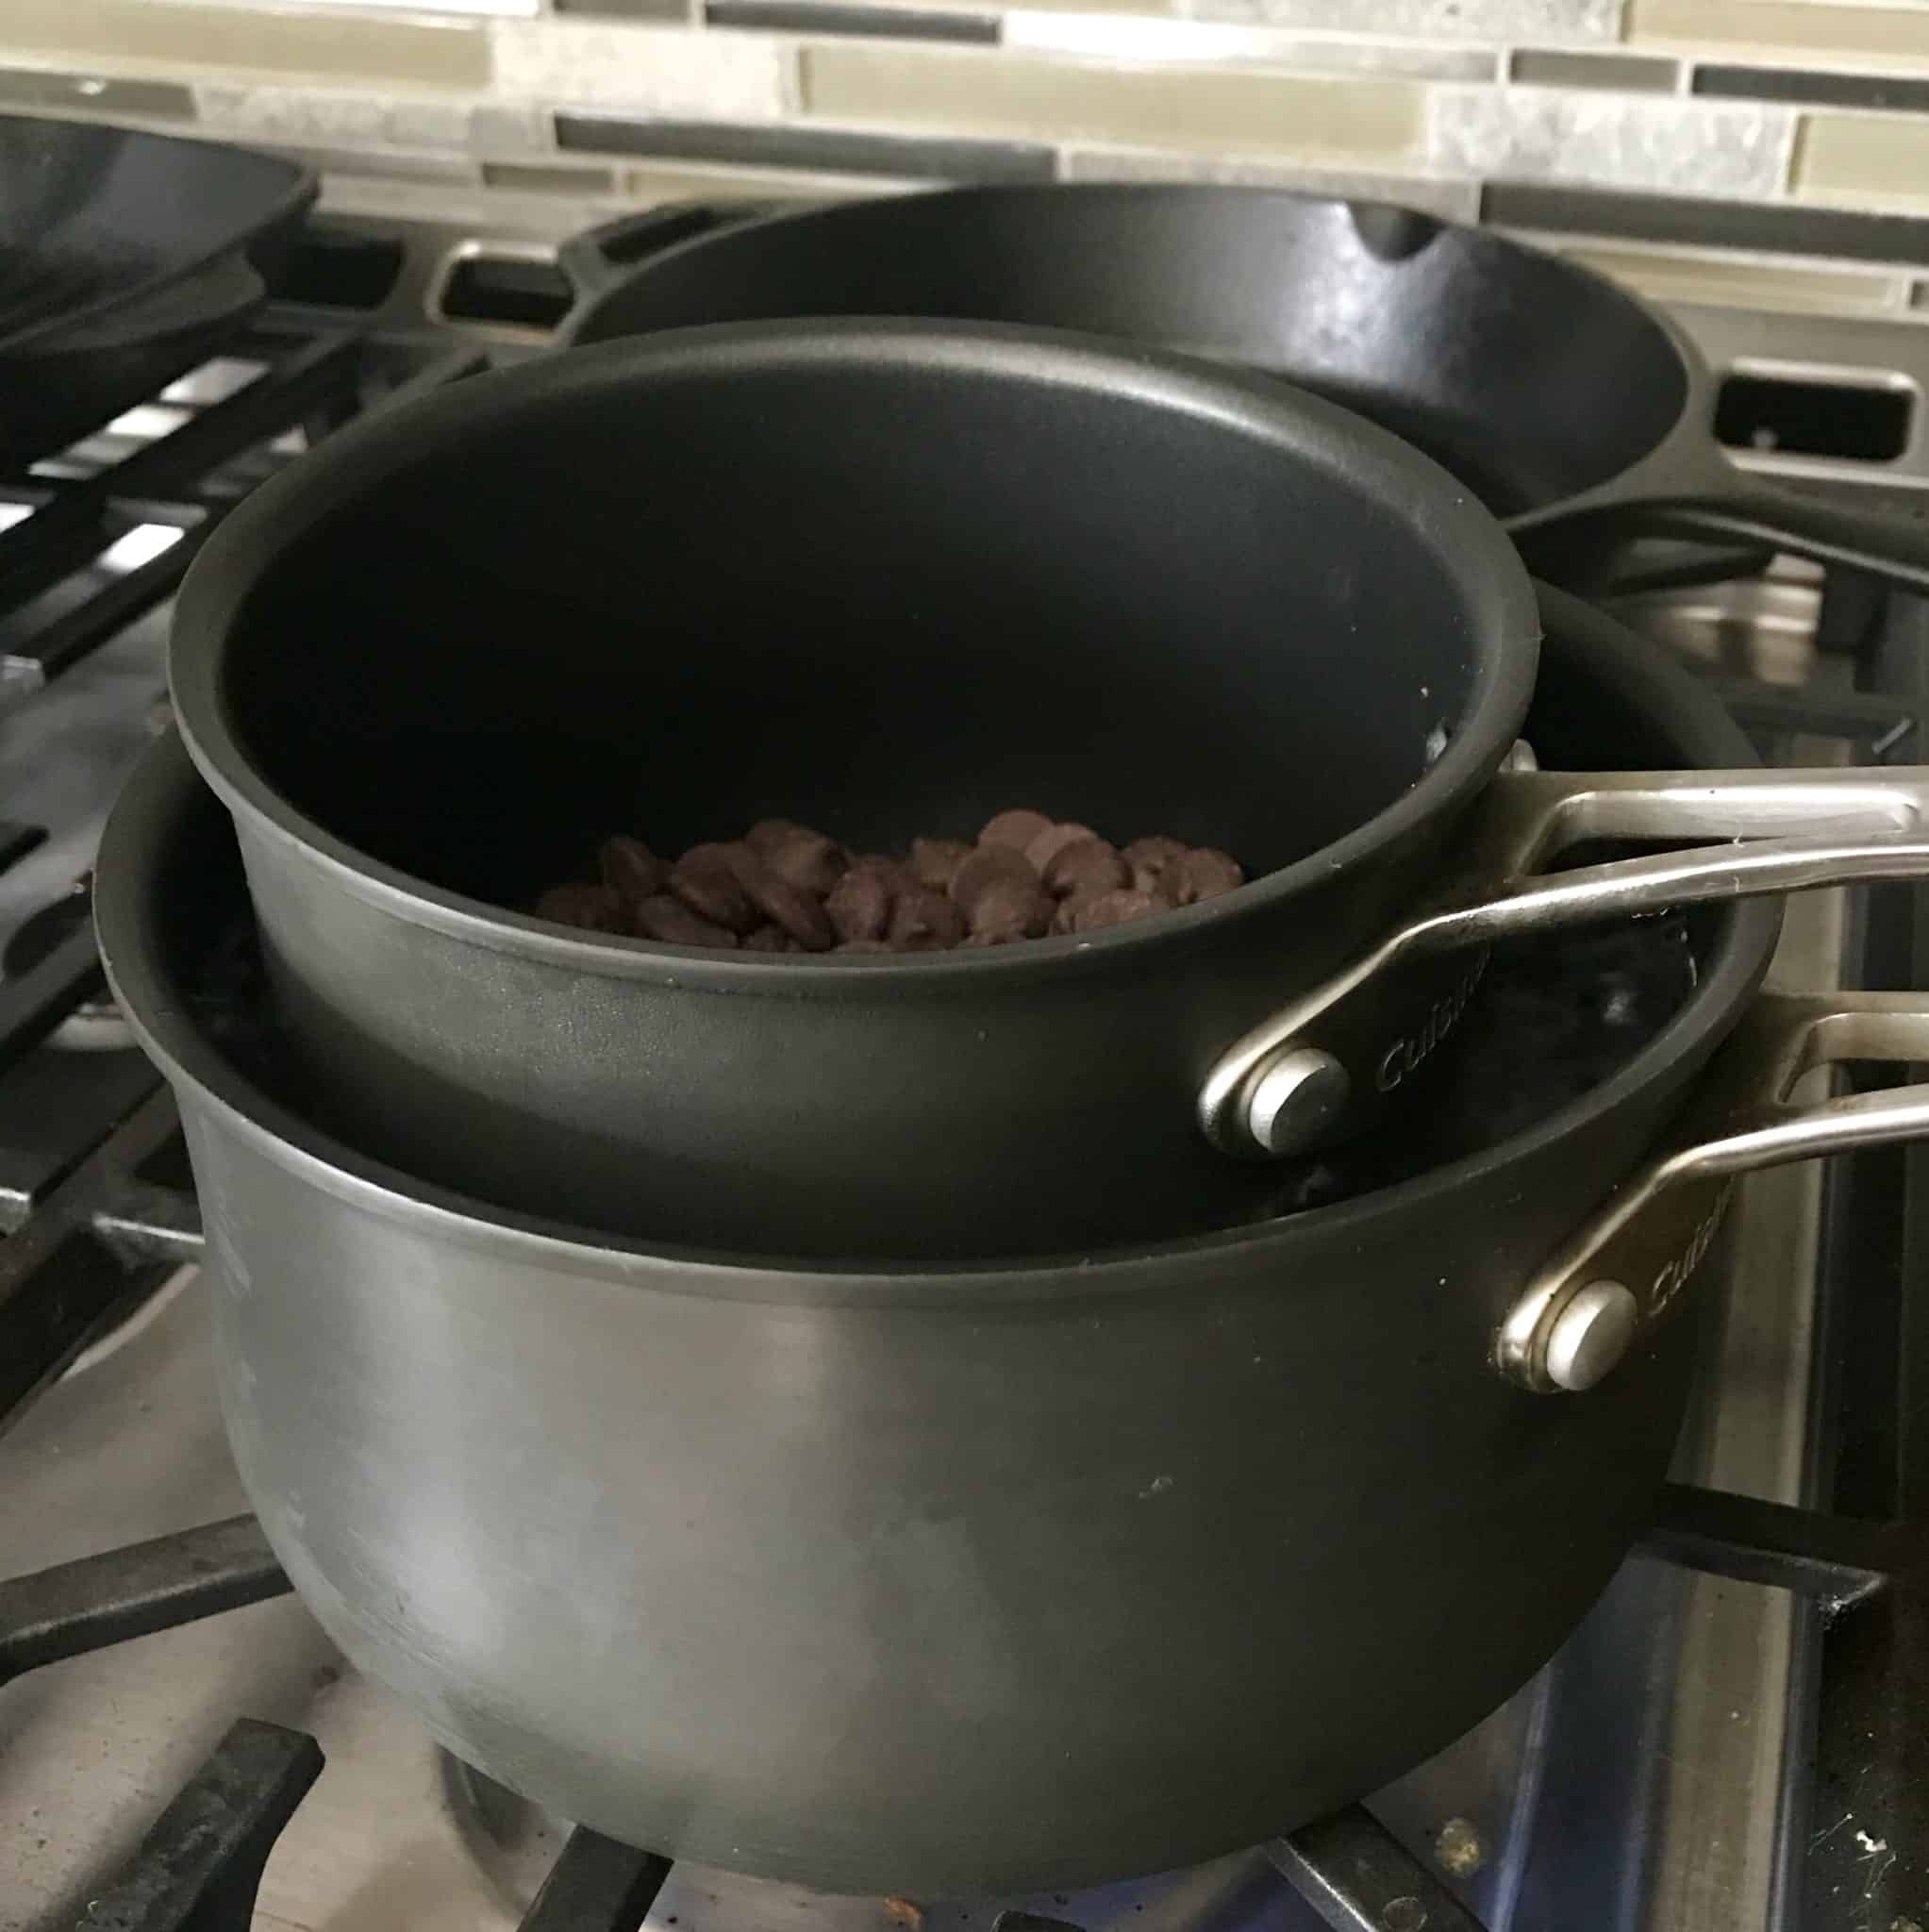 Double Boiler made with two pots to cook chocolate chips